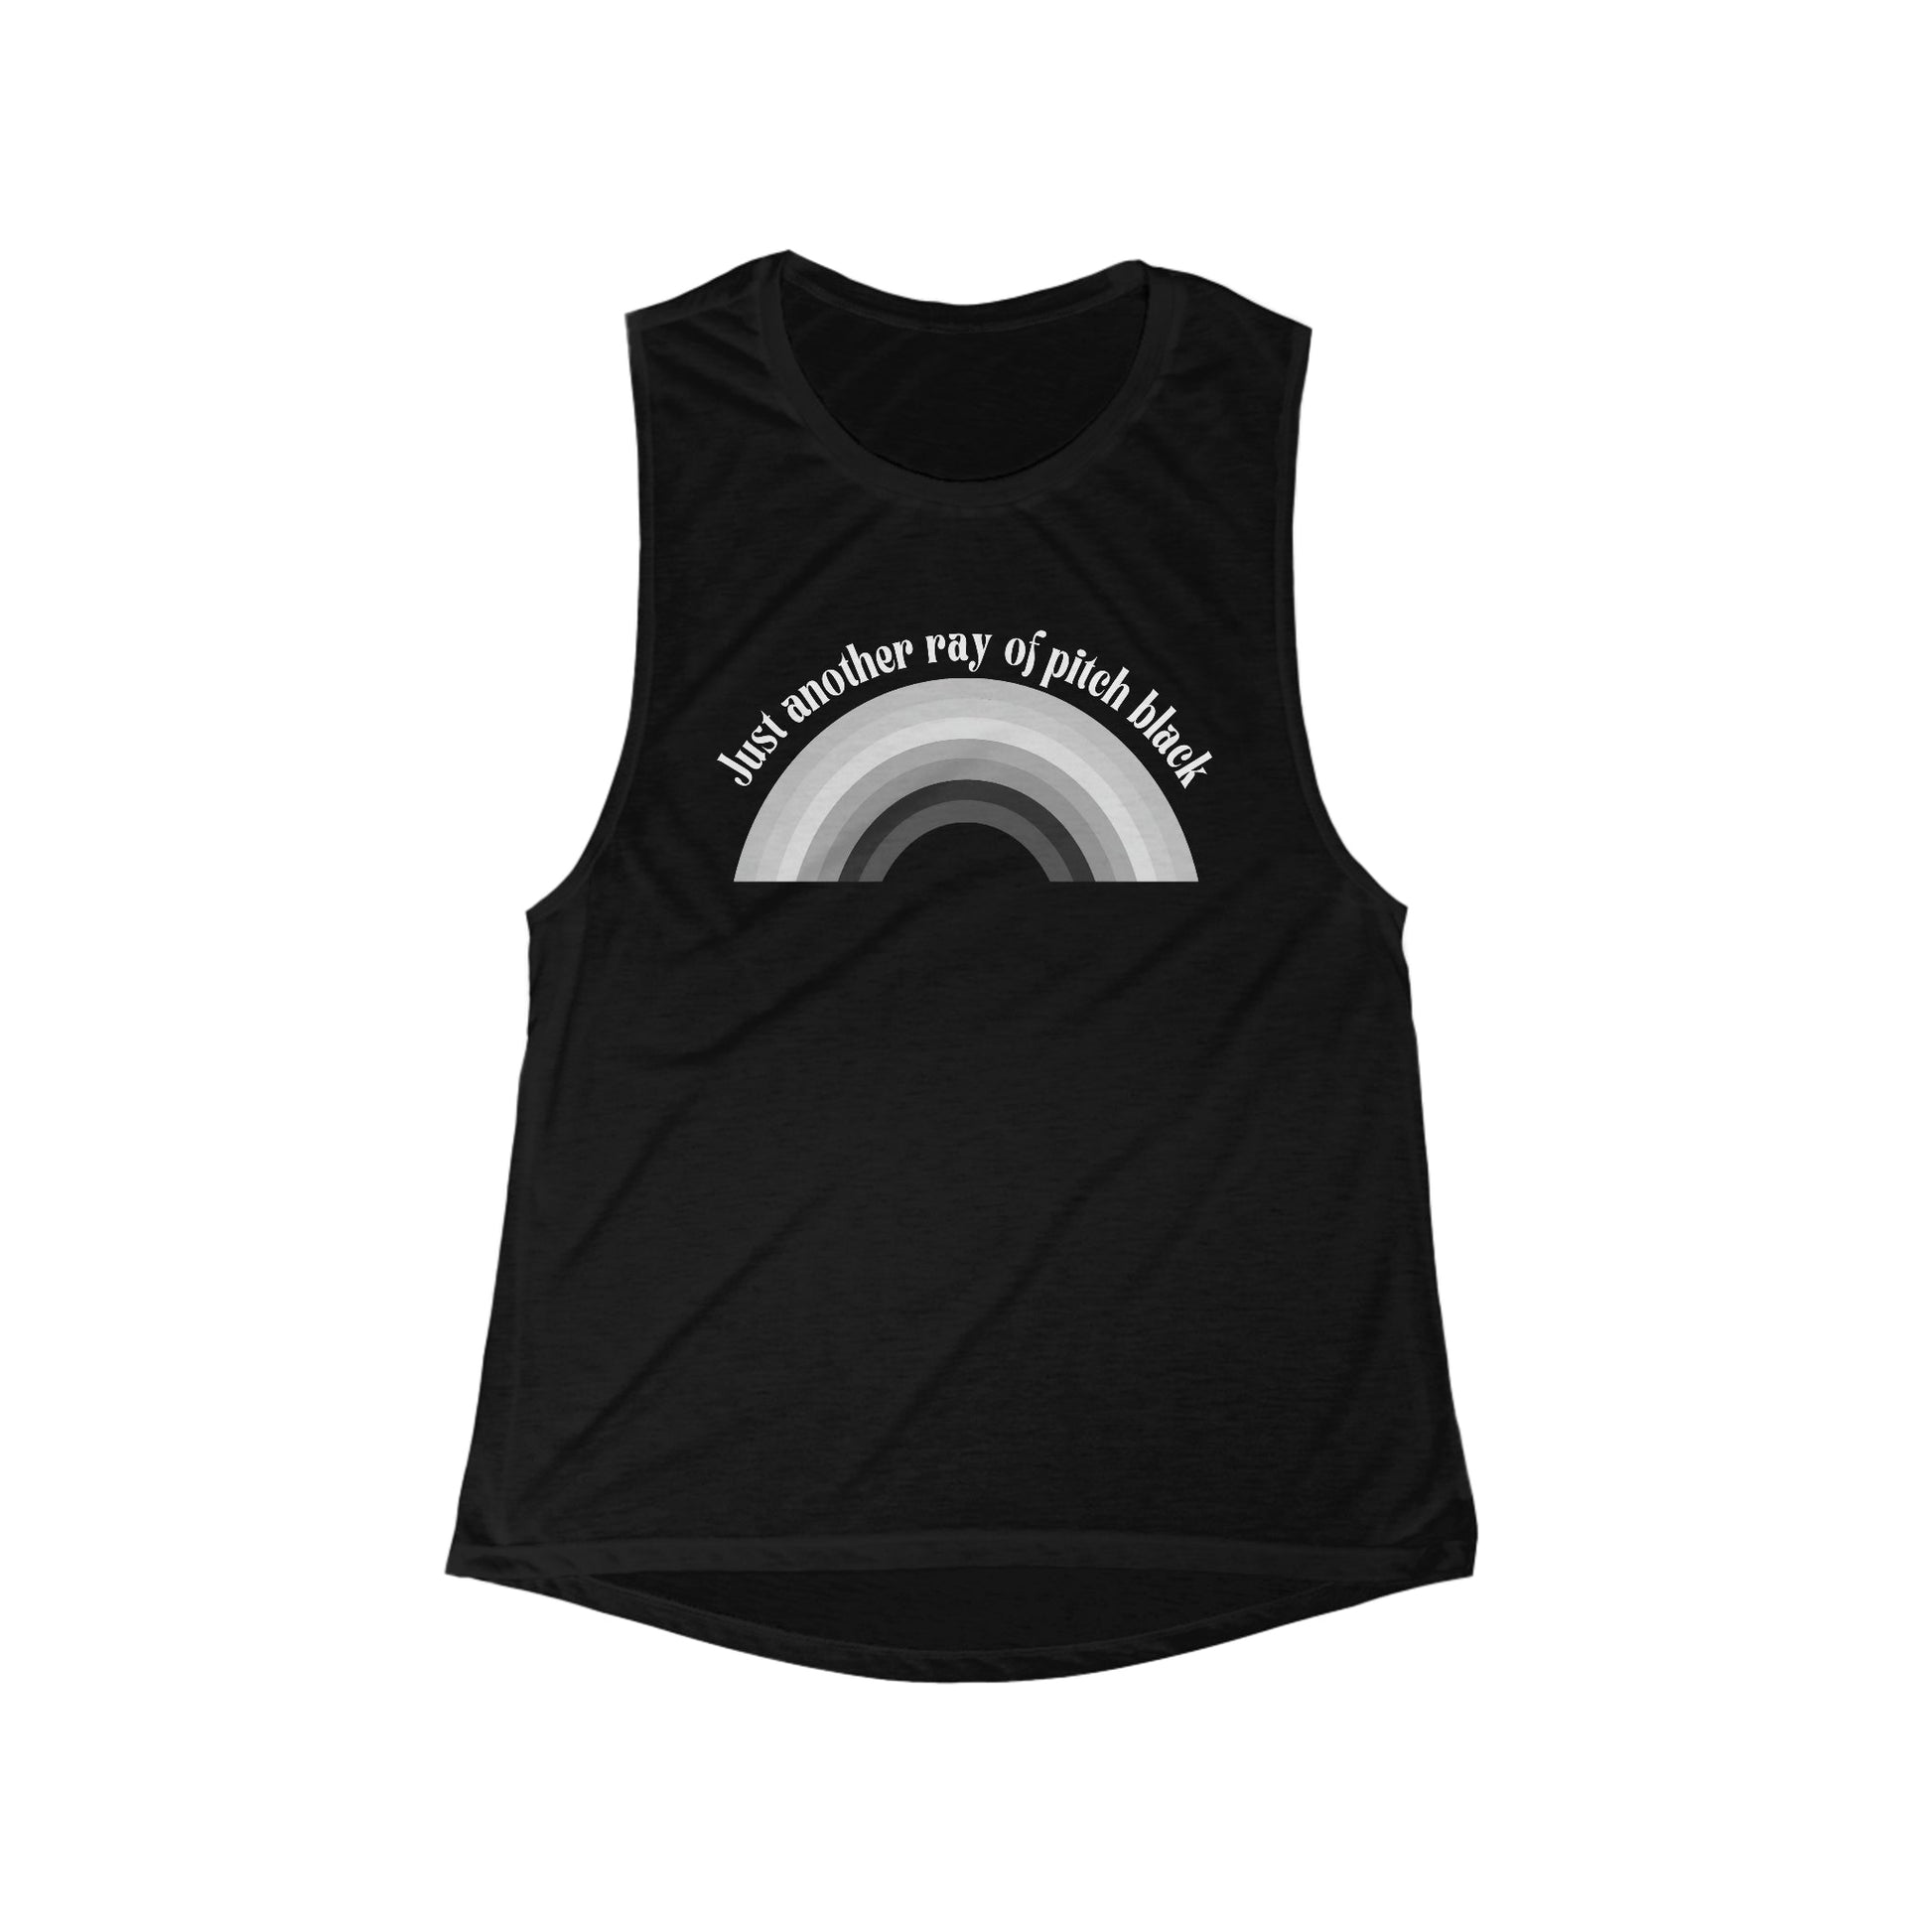 Just Another Ray of Pitch Black Flowy Scoop Muscle Tank